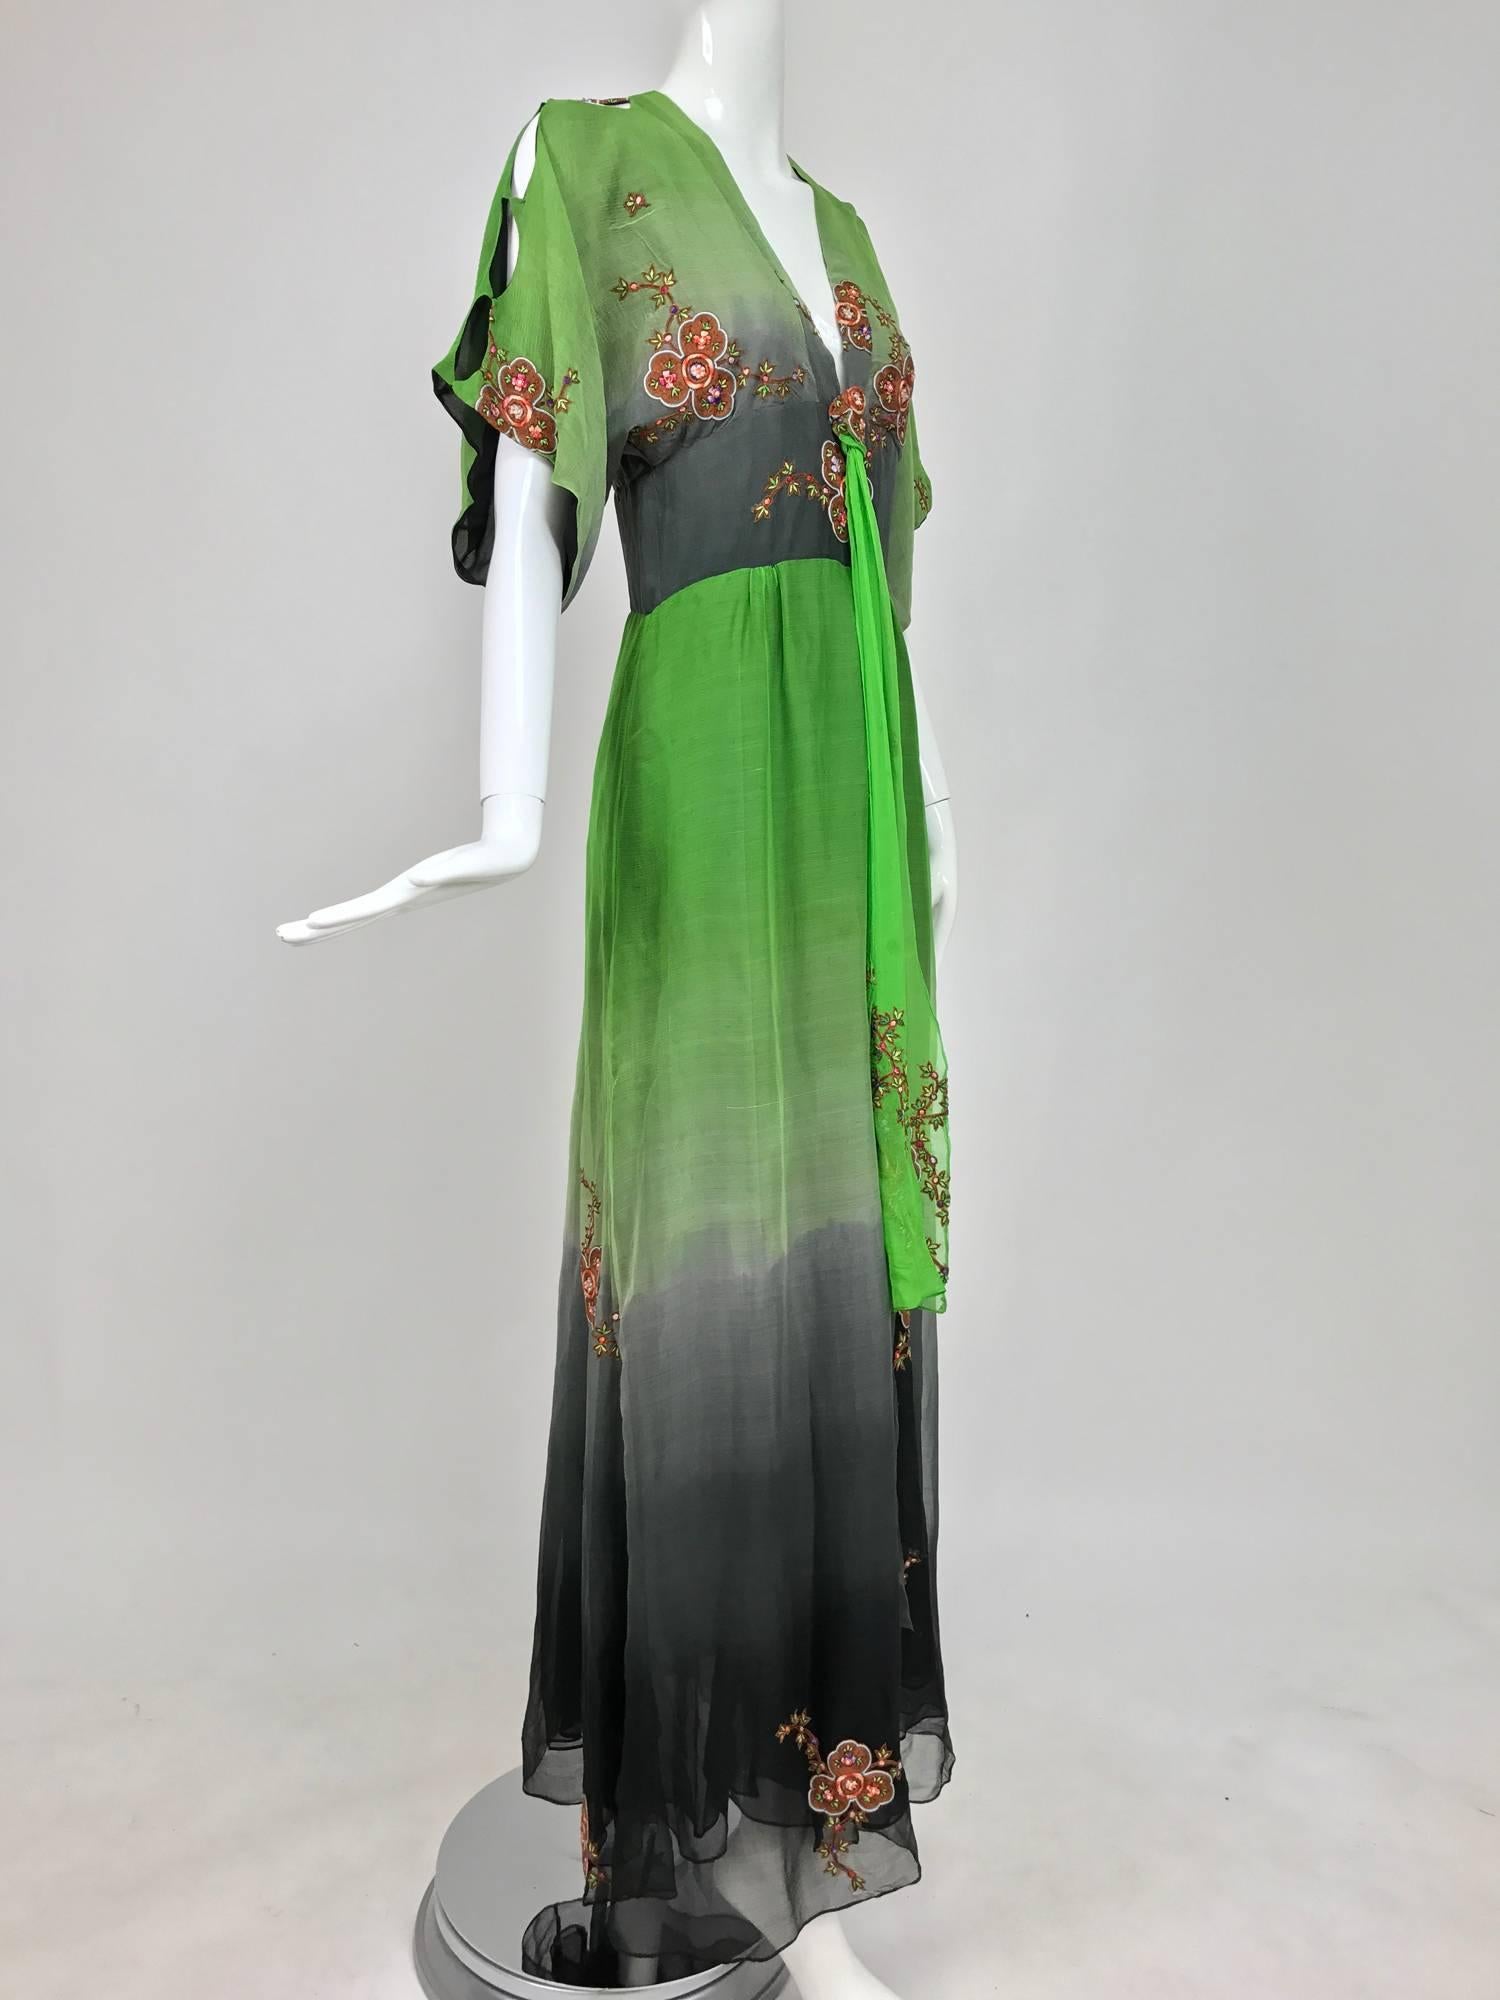 Thea Porter Couture ombred silk chiffon plunge gown with appliques 1970s 3